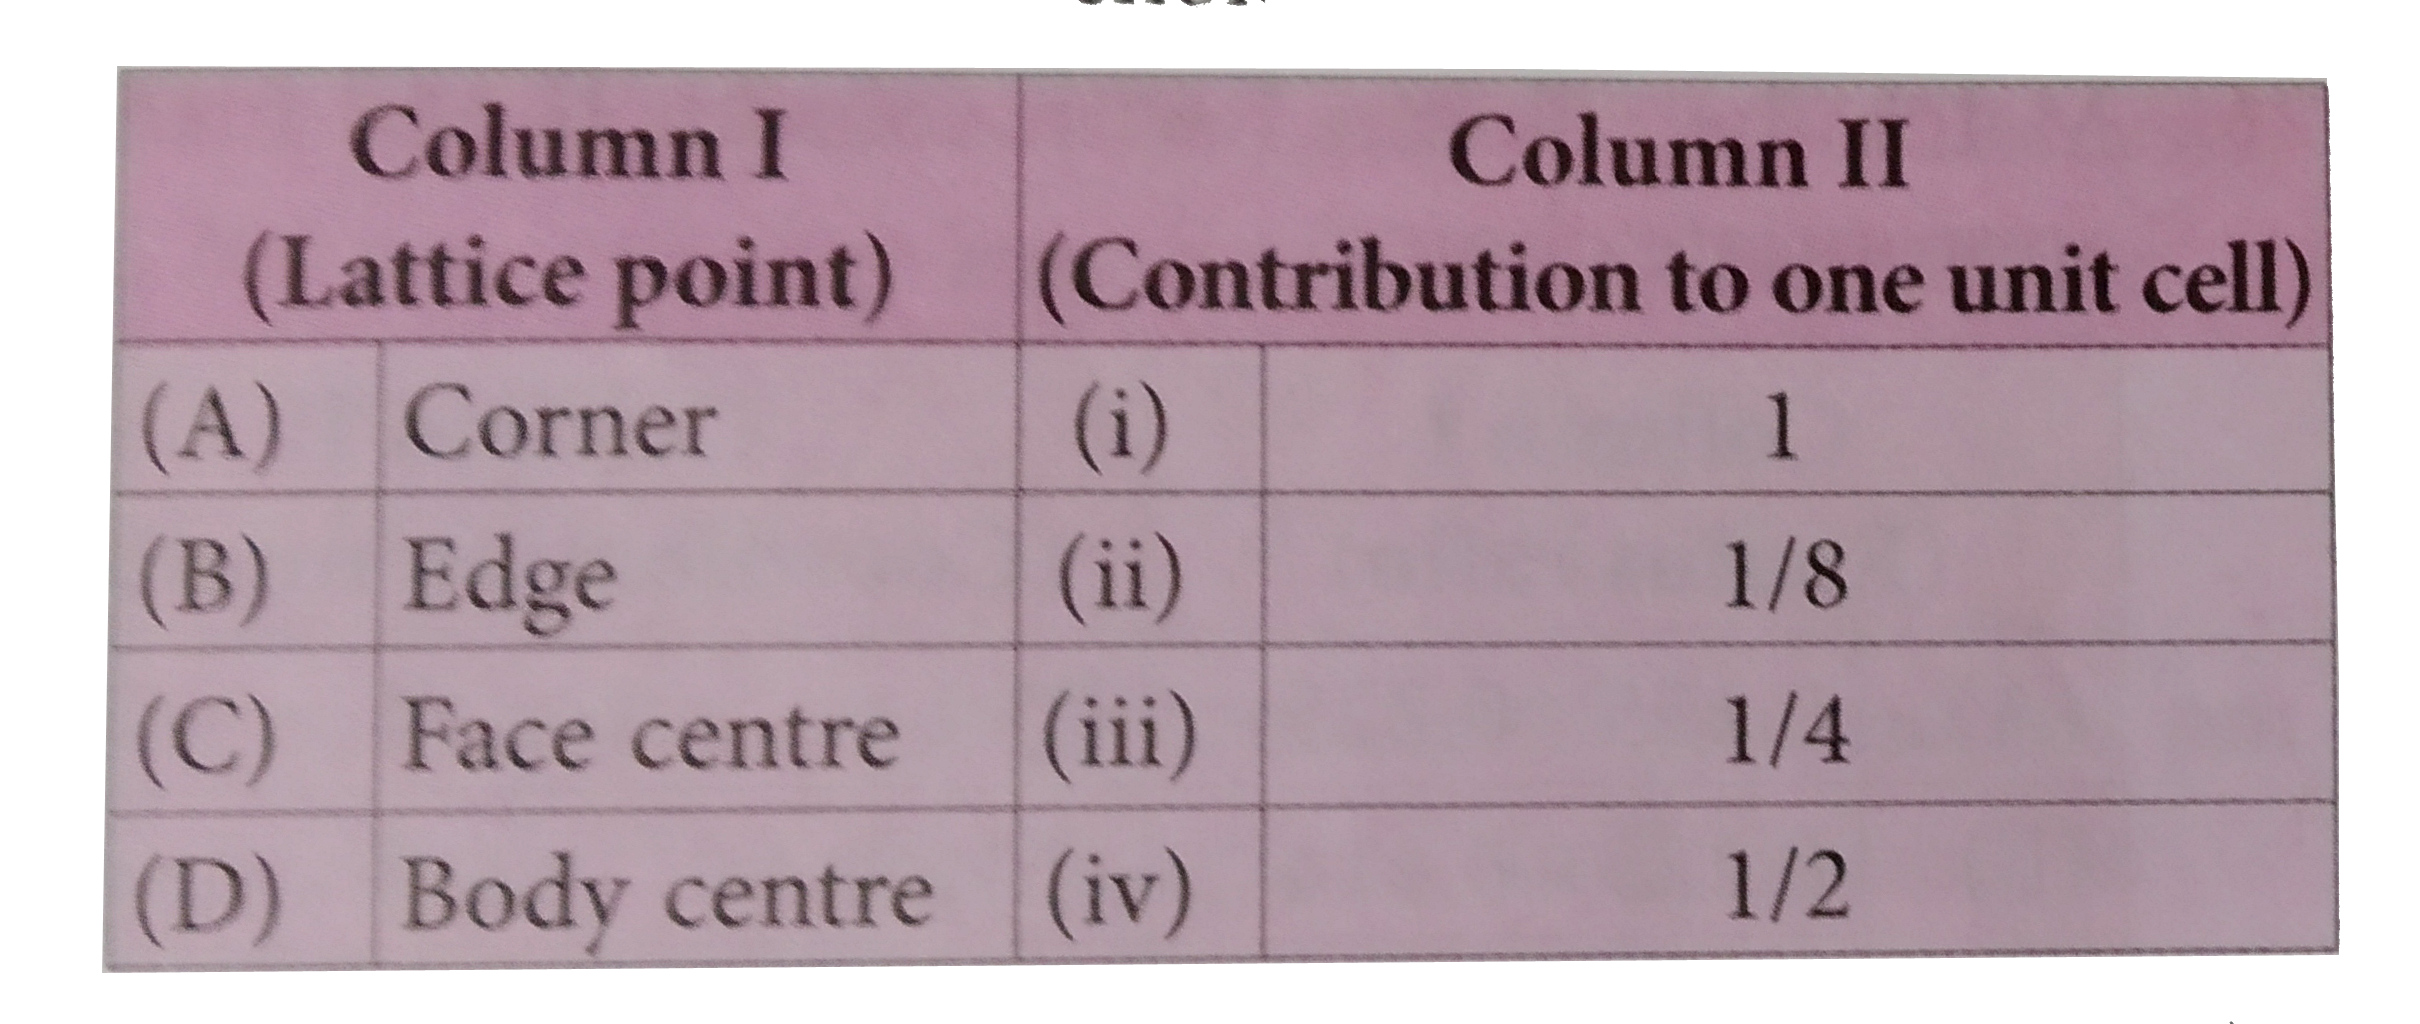 Match the column I having type of lattice point and its contribution to one unit cell in column II and mark the appropriate choice .